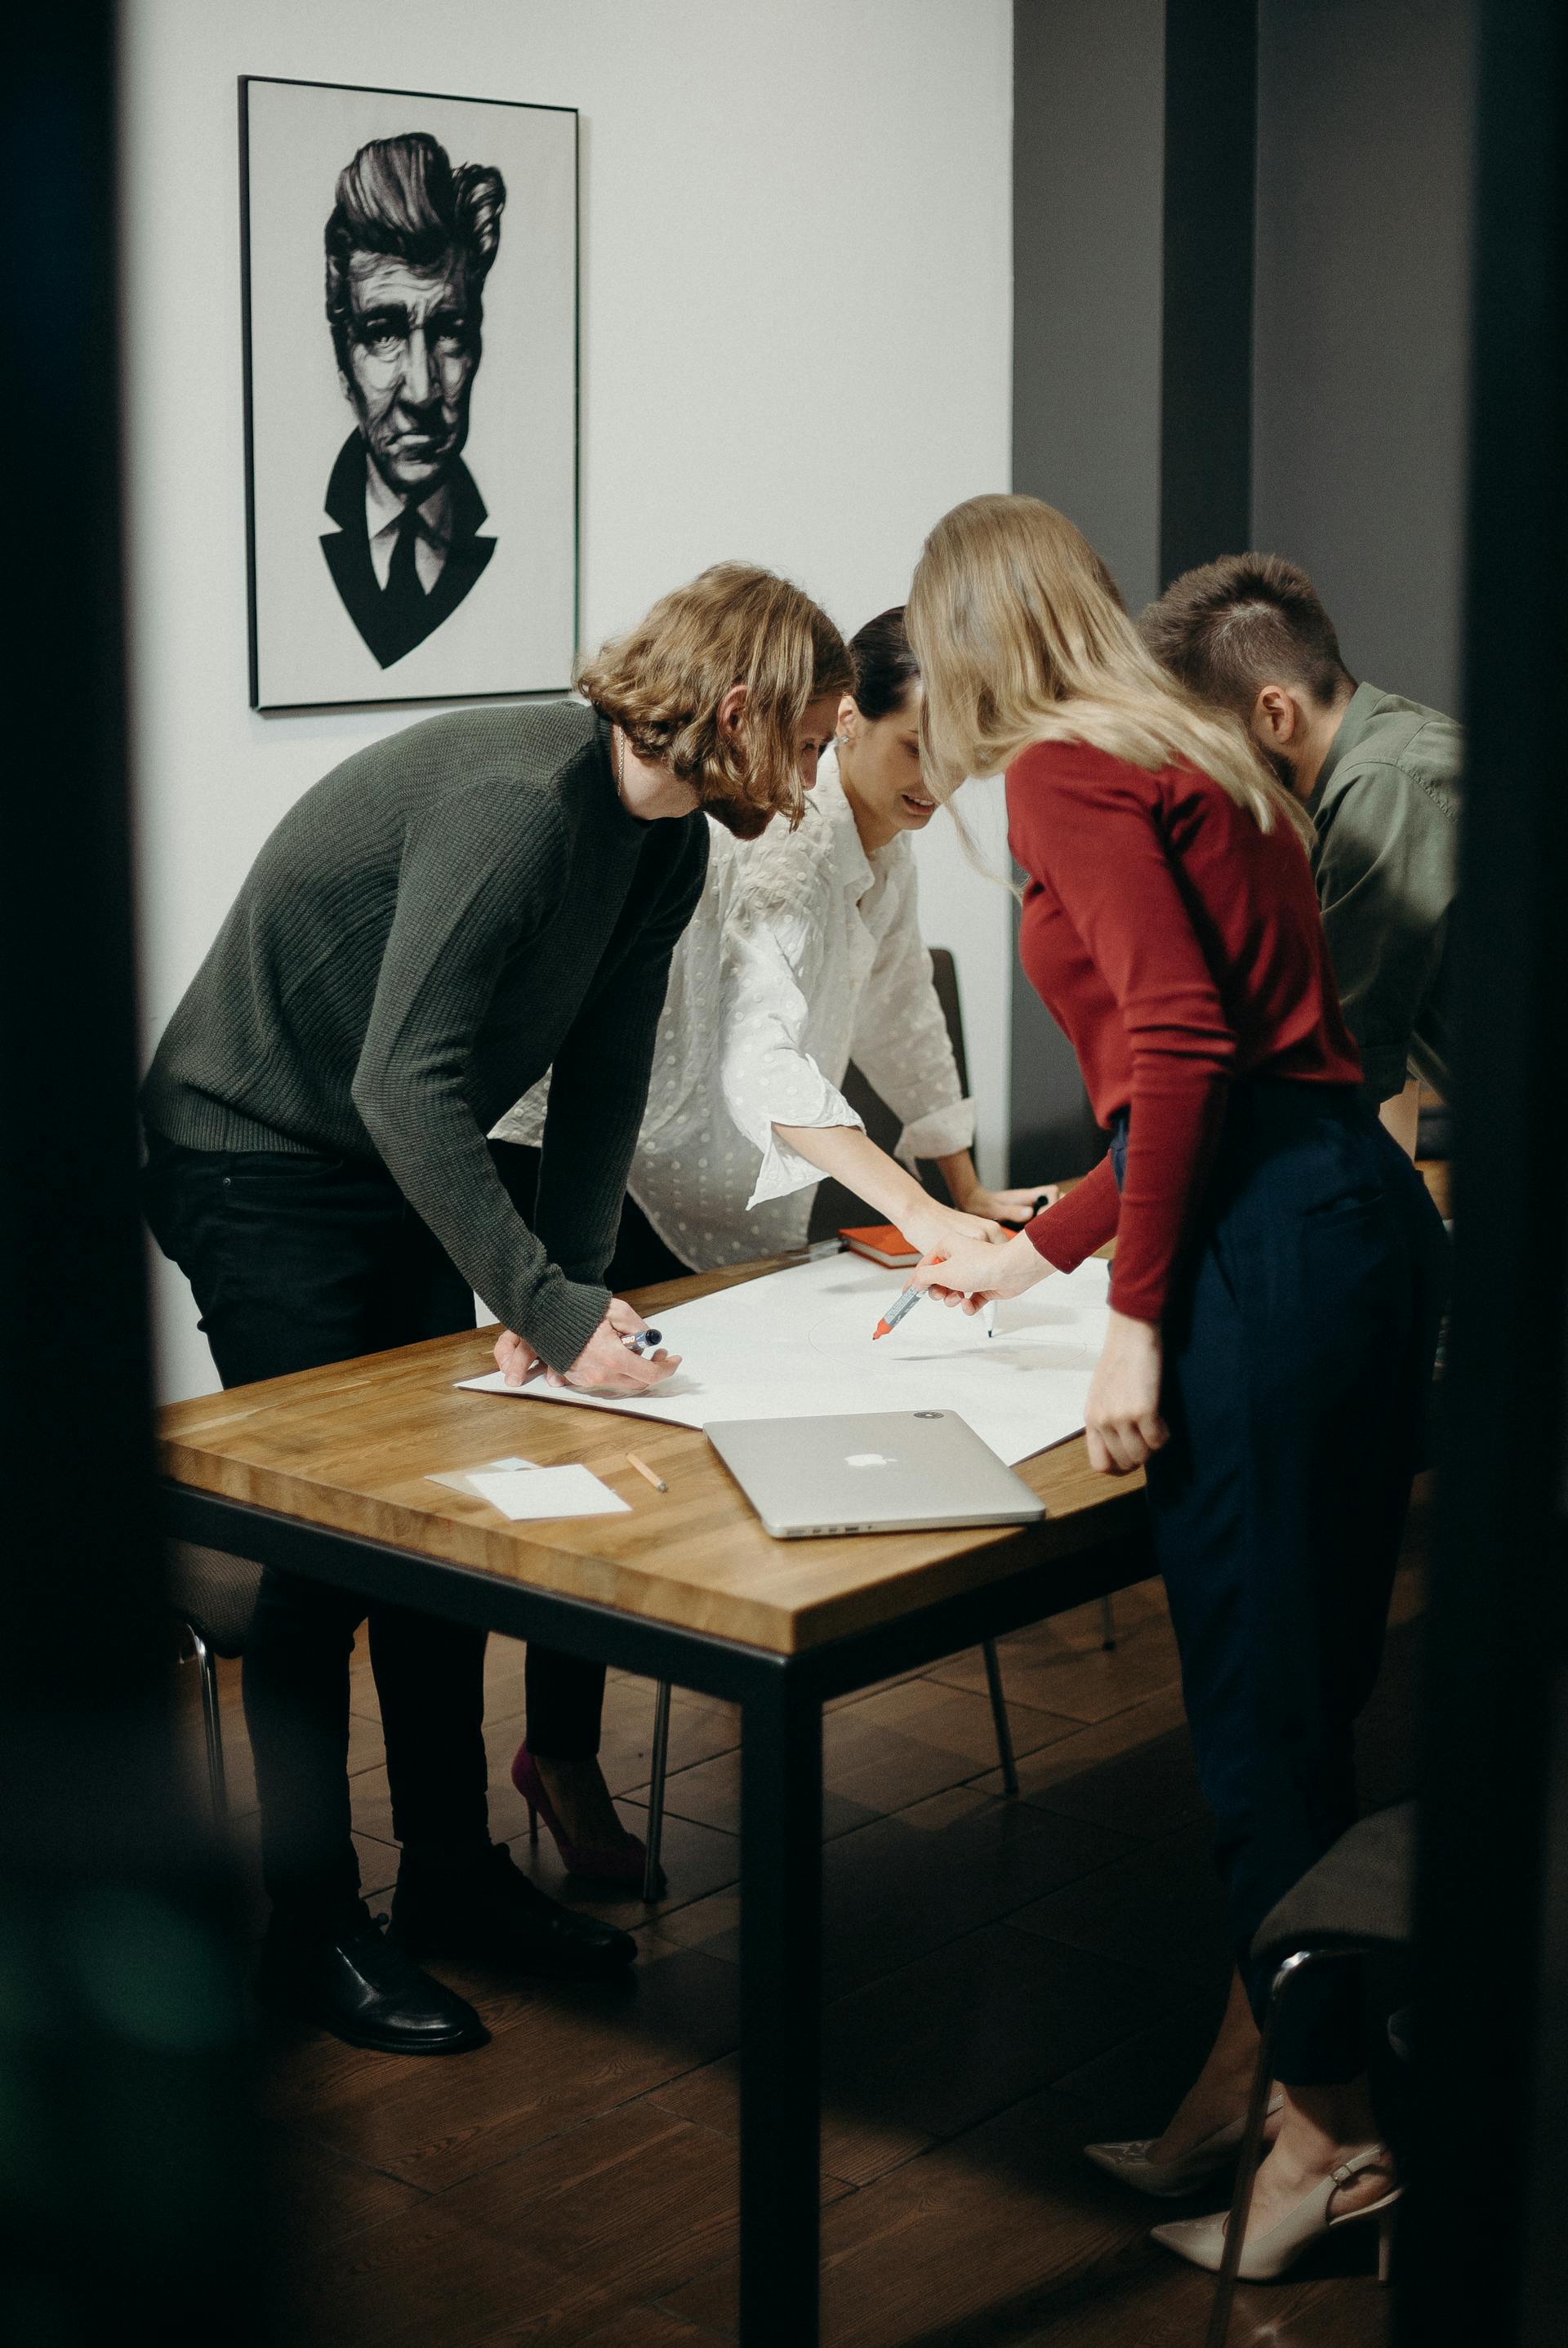 A group of people standing around a table | Source: Pexels